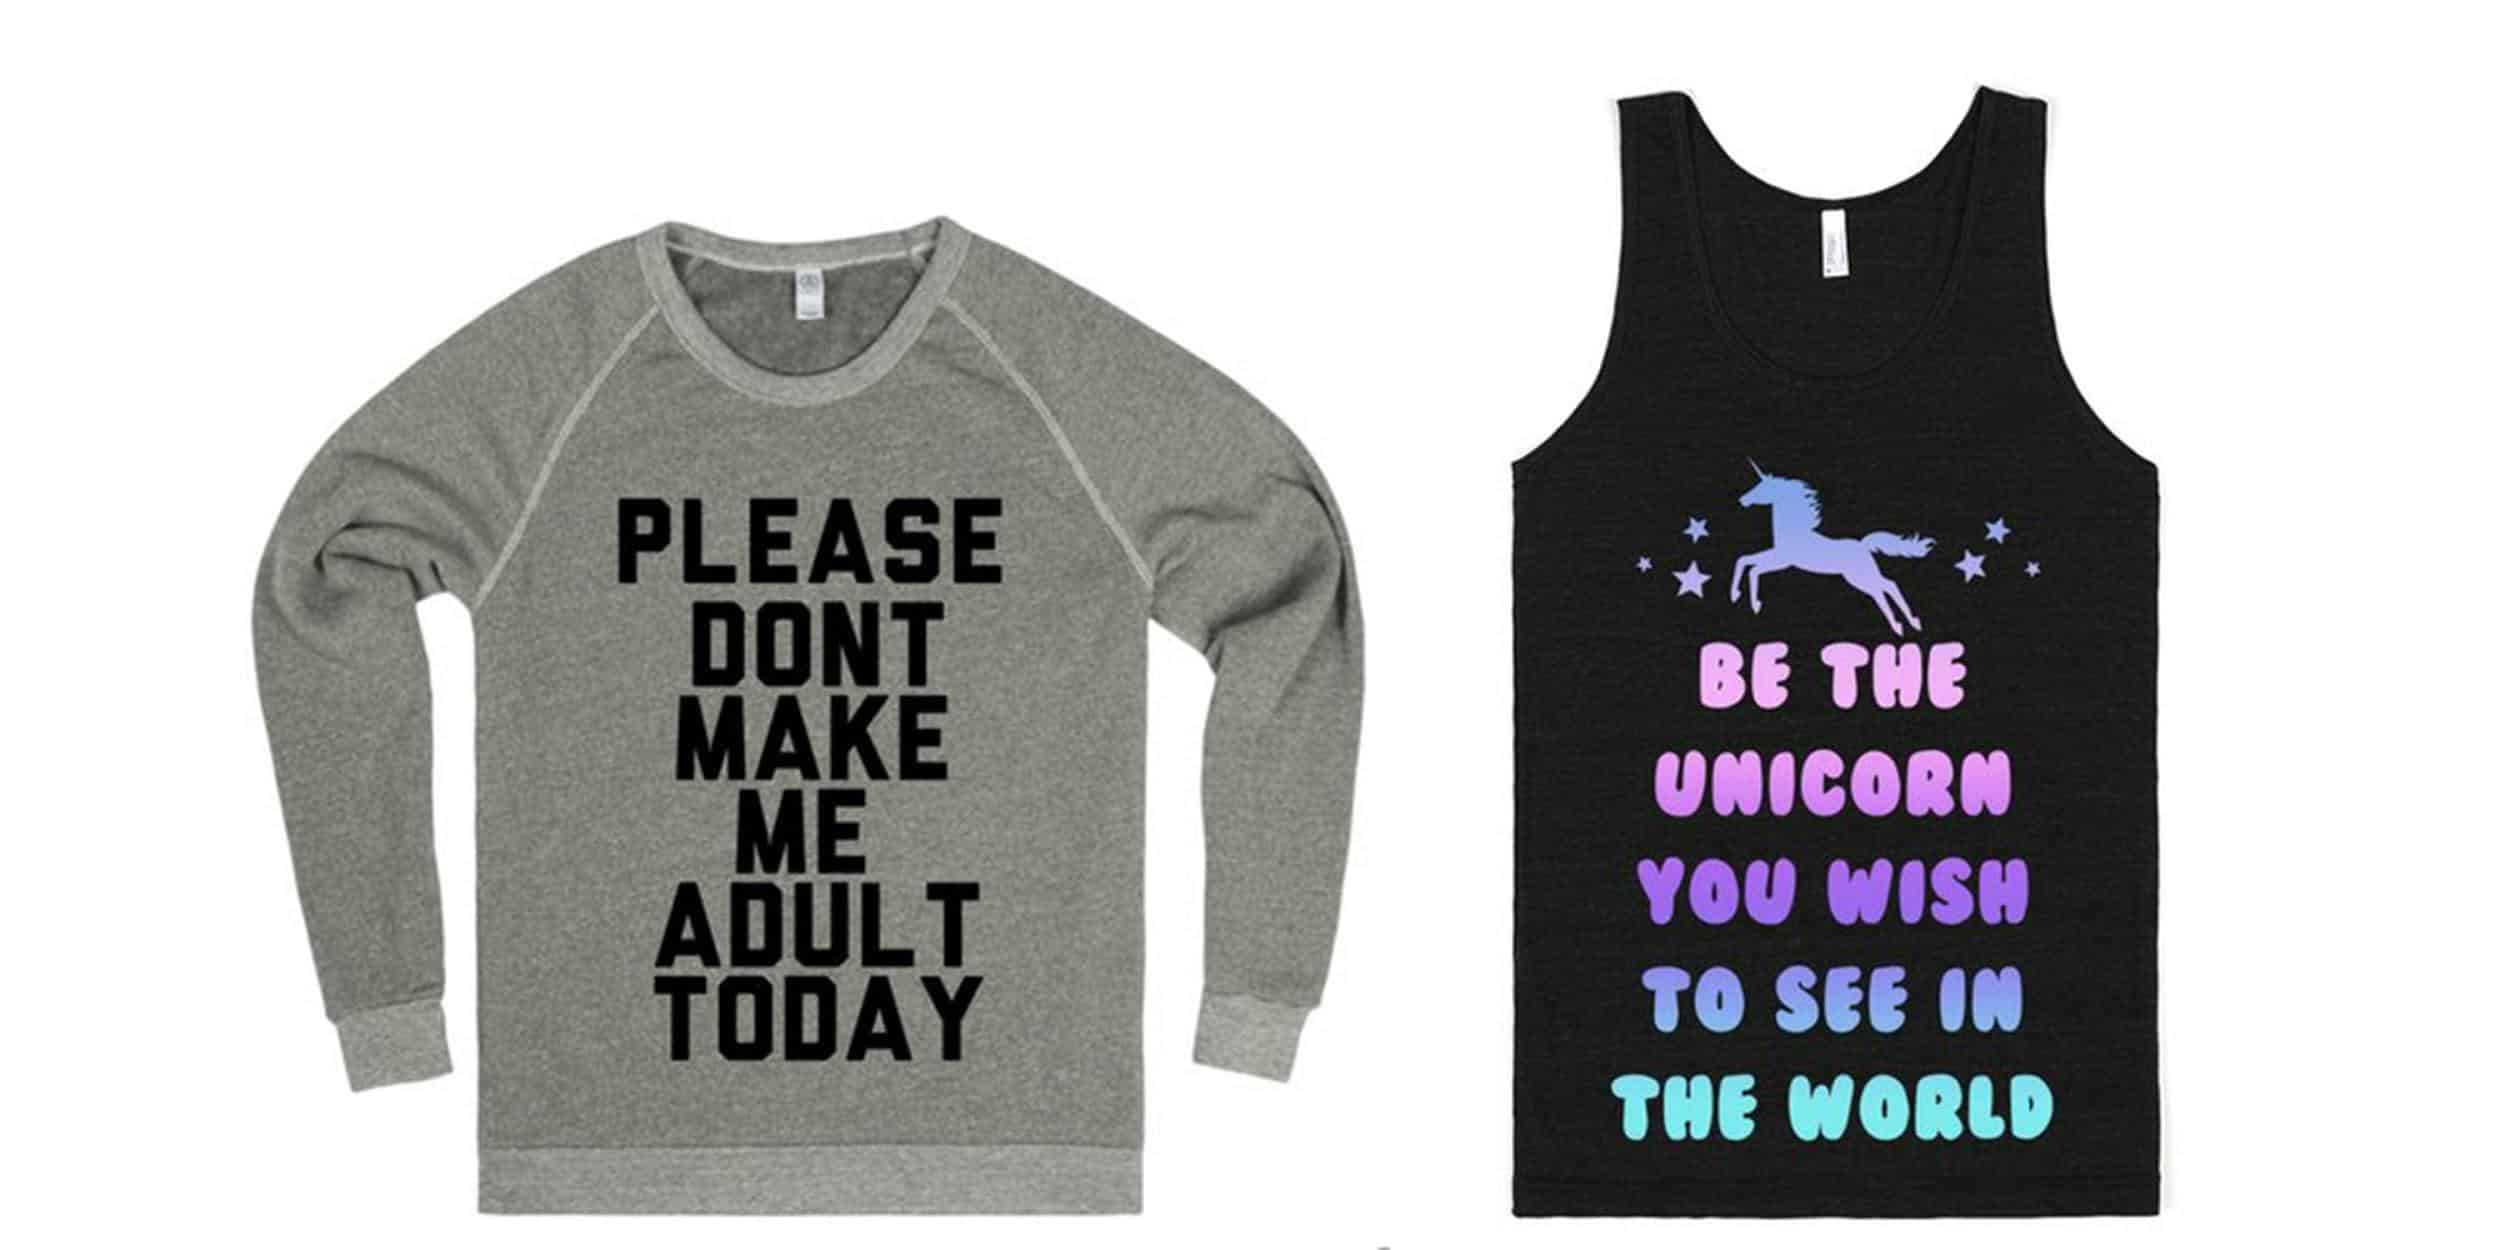 Two product photographs. On the left, a sweatshirt with the text: Please don't make me adult today. On the right, a racerback with the text: Be the unicorn you wish to see in the world. 